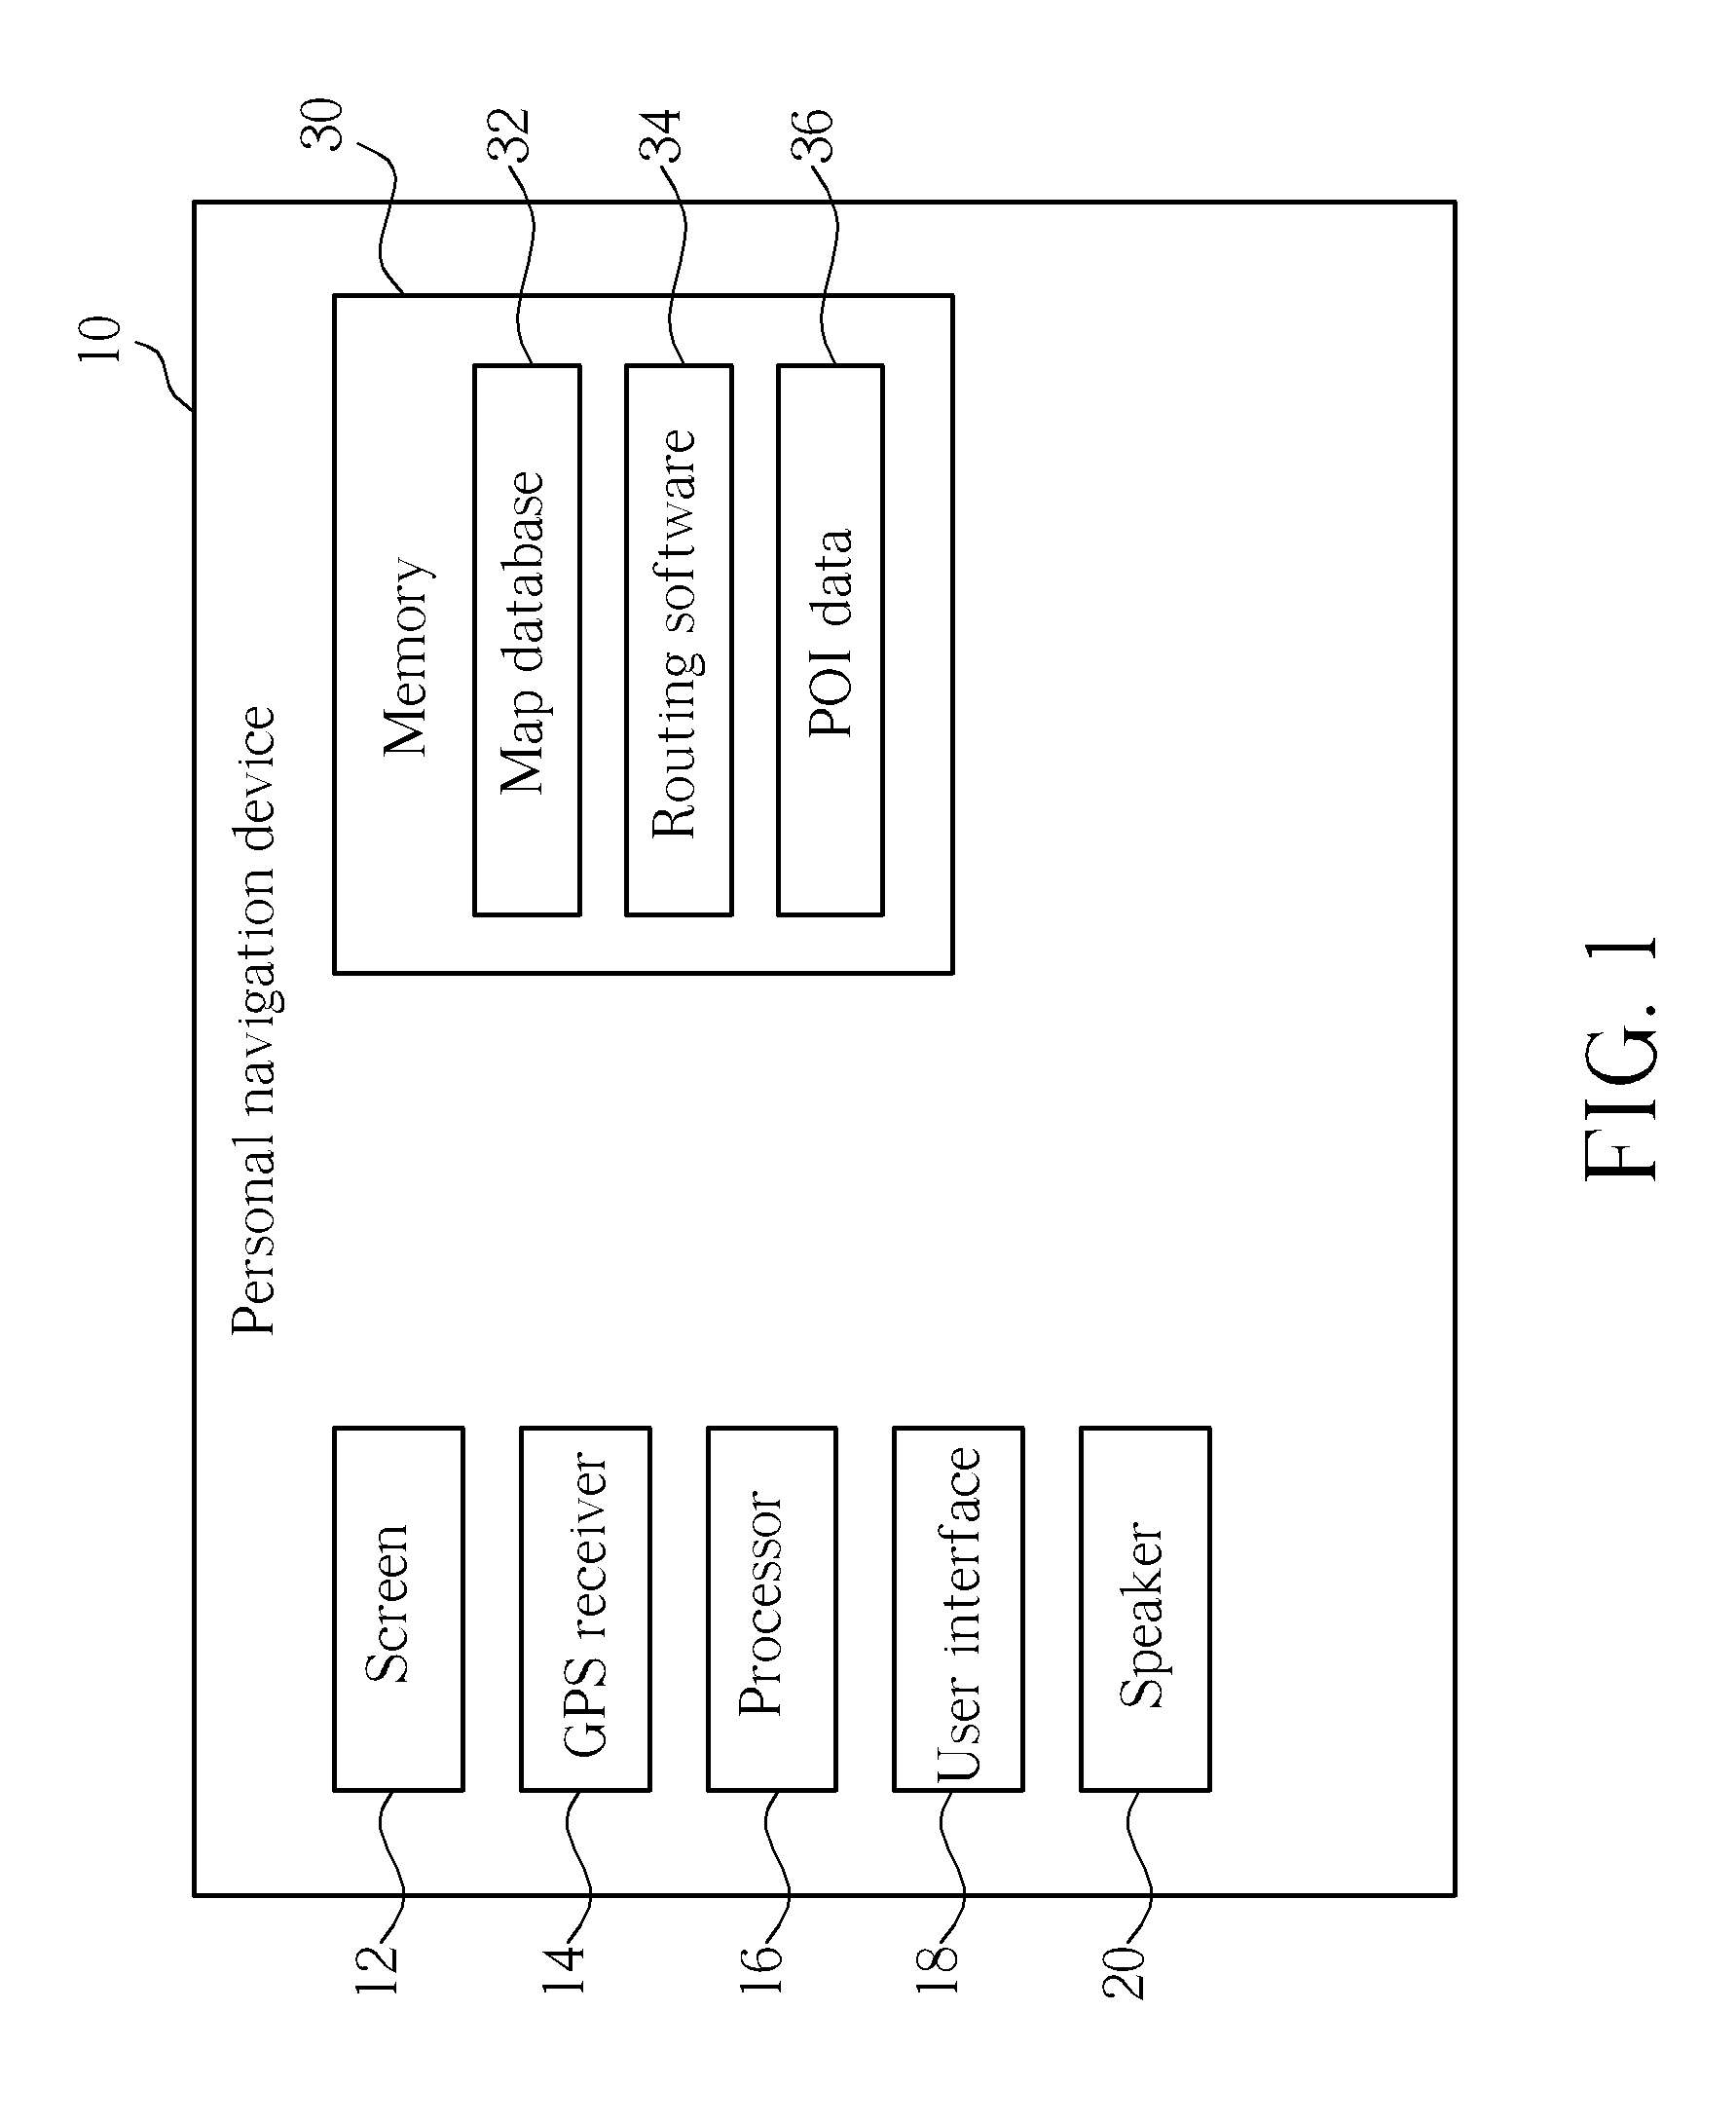 Method of displaying multiple points of interest on a personal navigation device